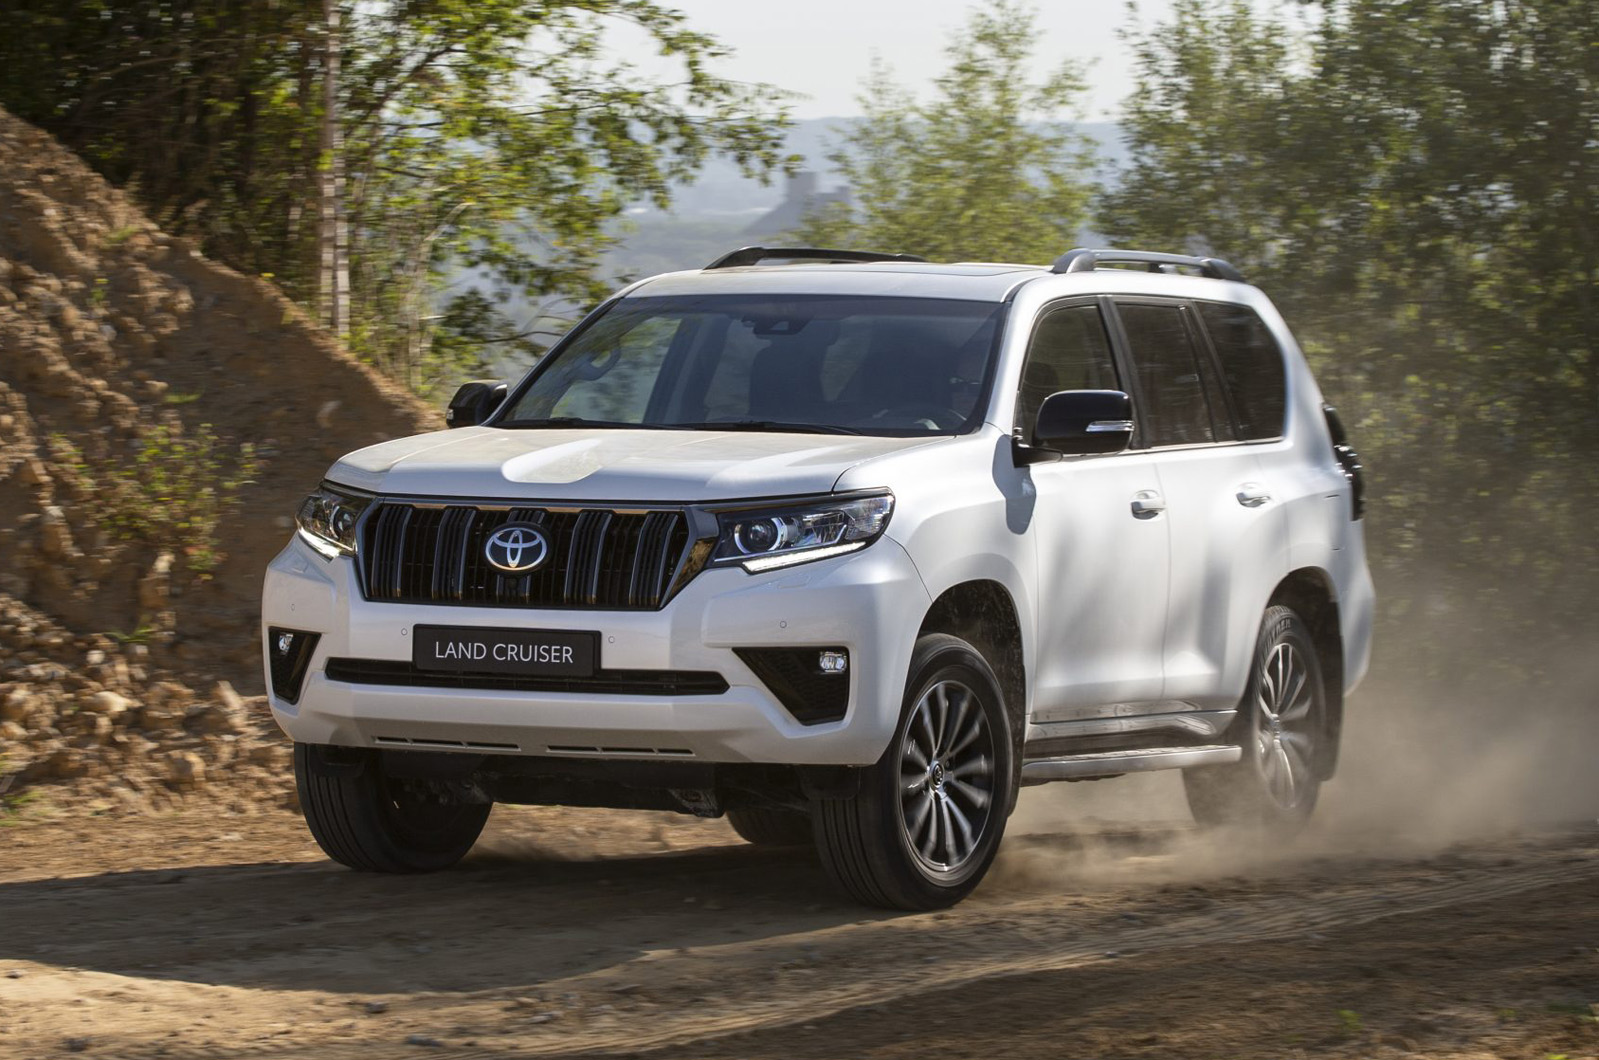  Toyota Land Cruiser  gains more power new technology for 